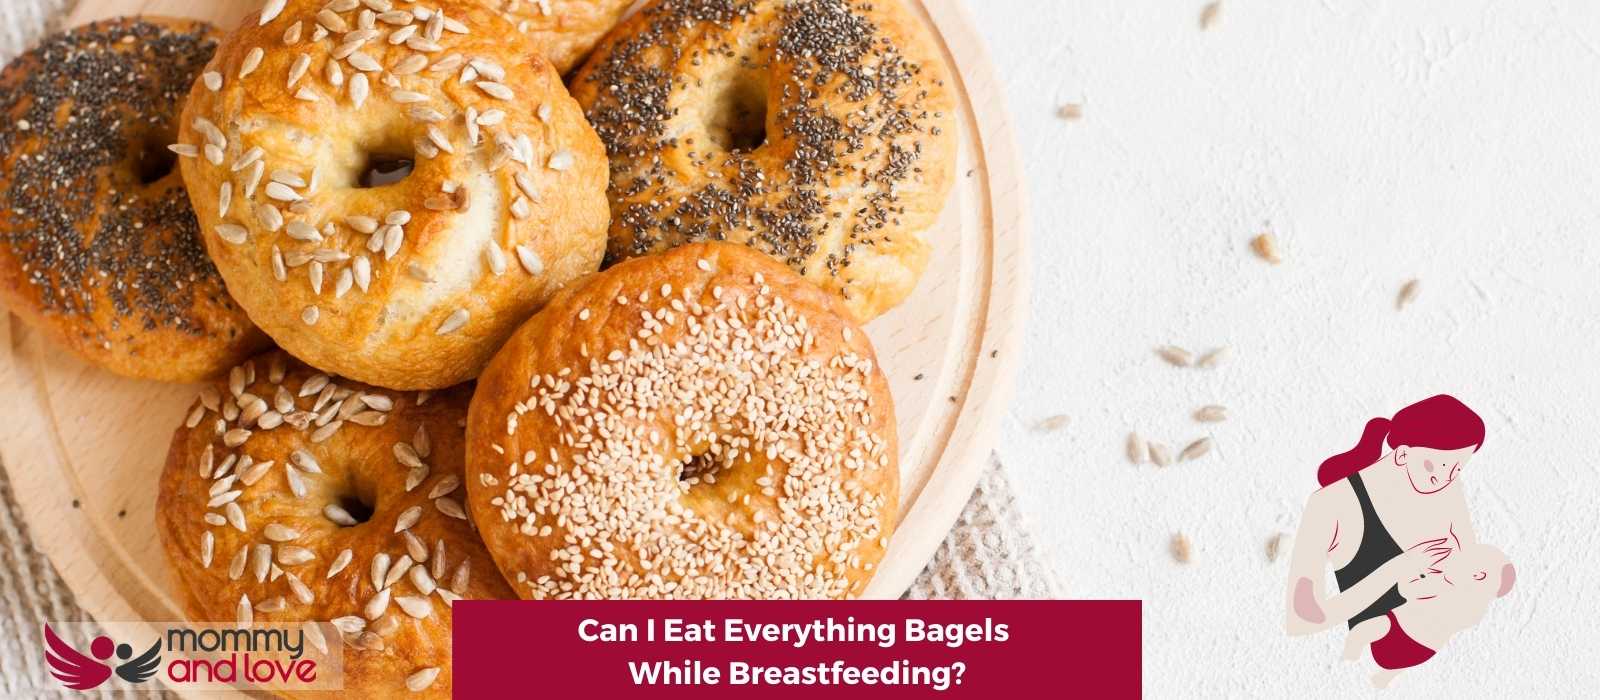 Can I Eat Everything Bagels While Breastfeeding